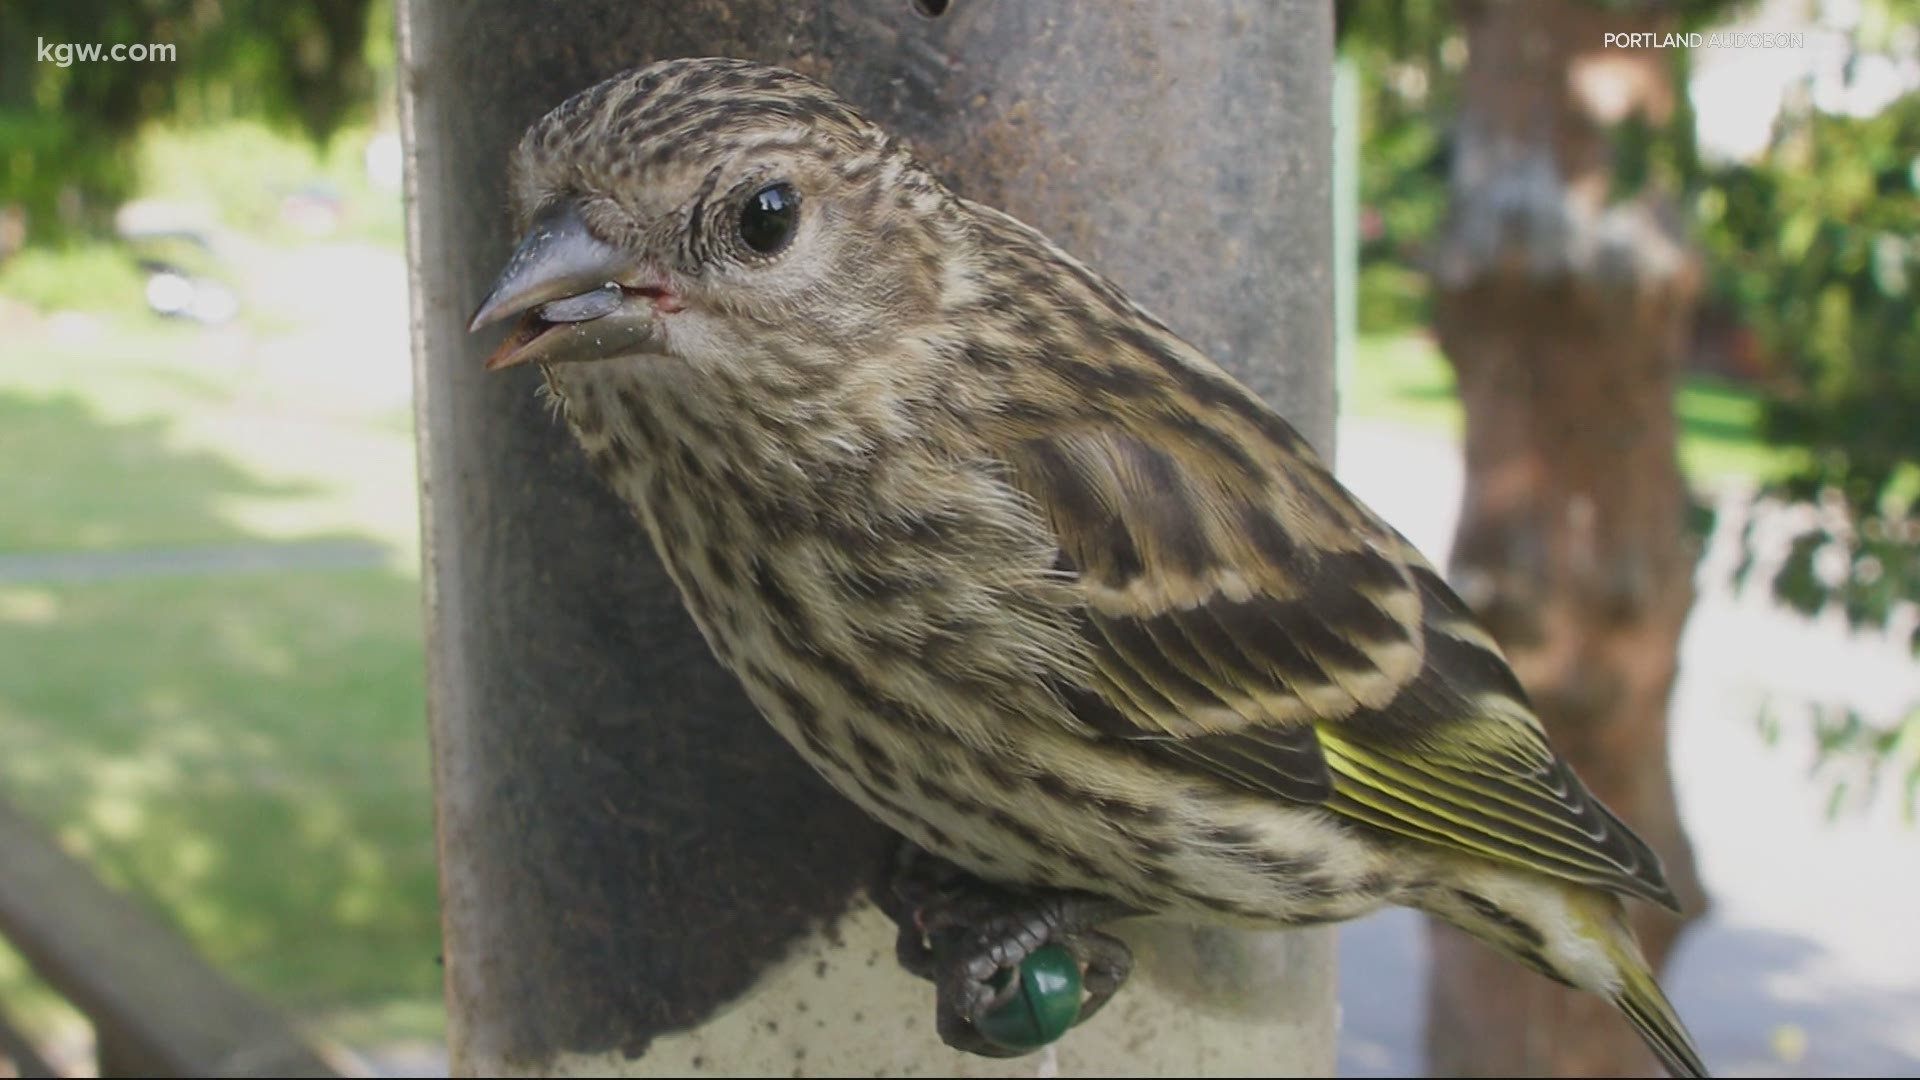 Portland Audubon is seeing a high number of pine siskins with symptoms of salmonella. You can help curb an outbreak in local birds by practicing safe bird feeding.